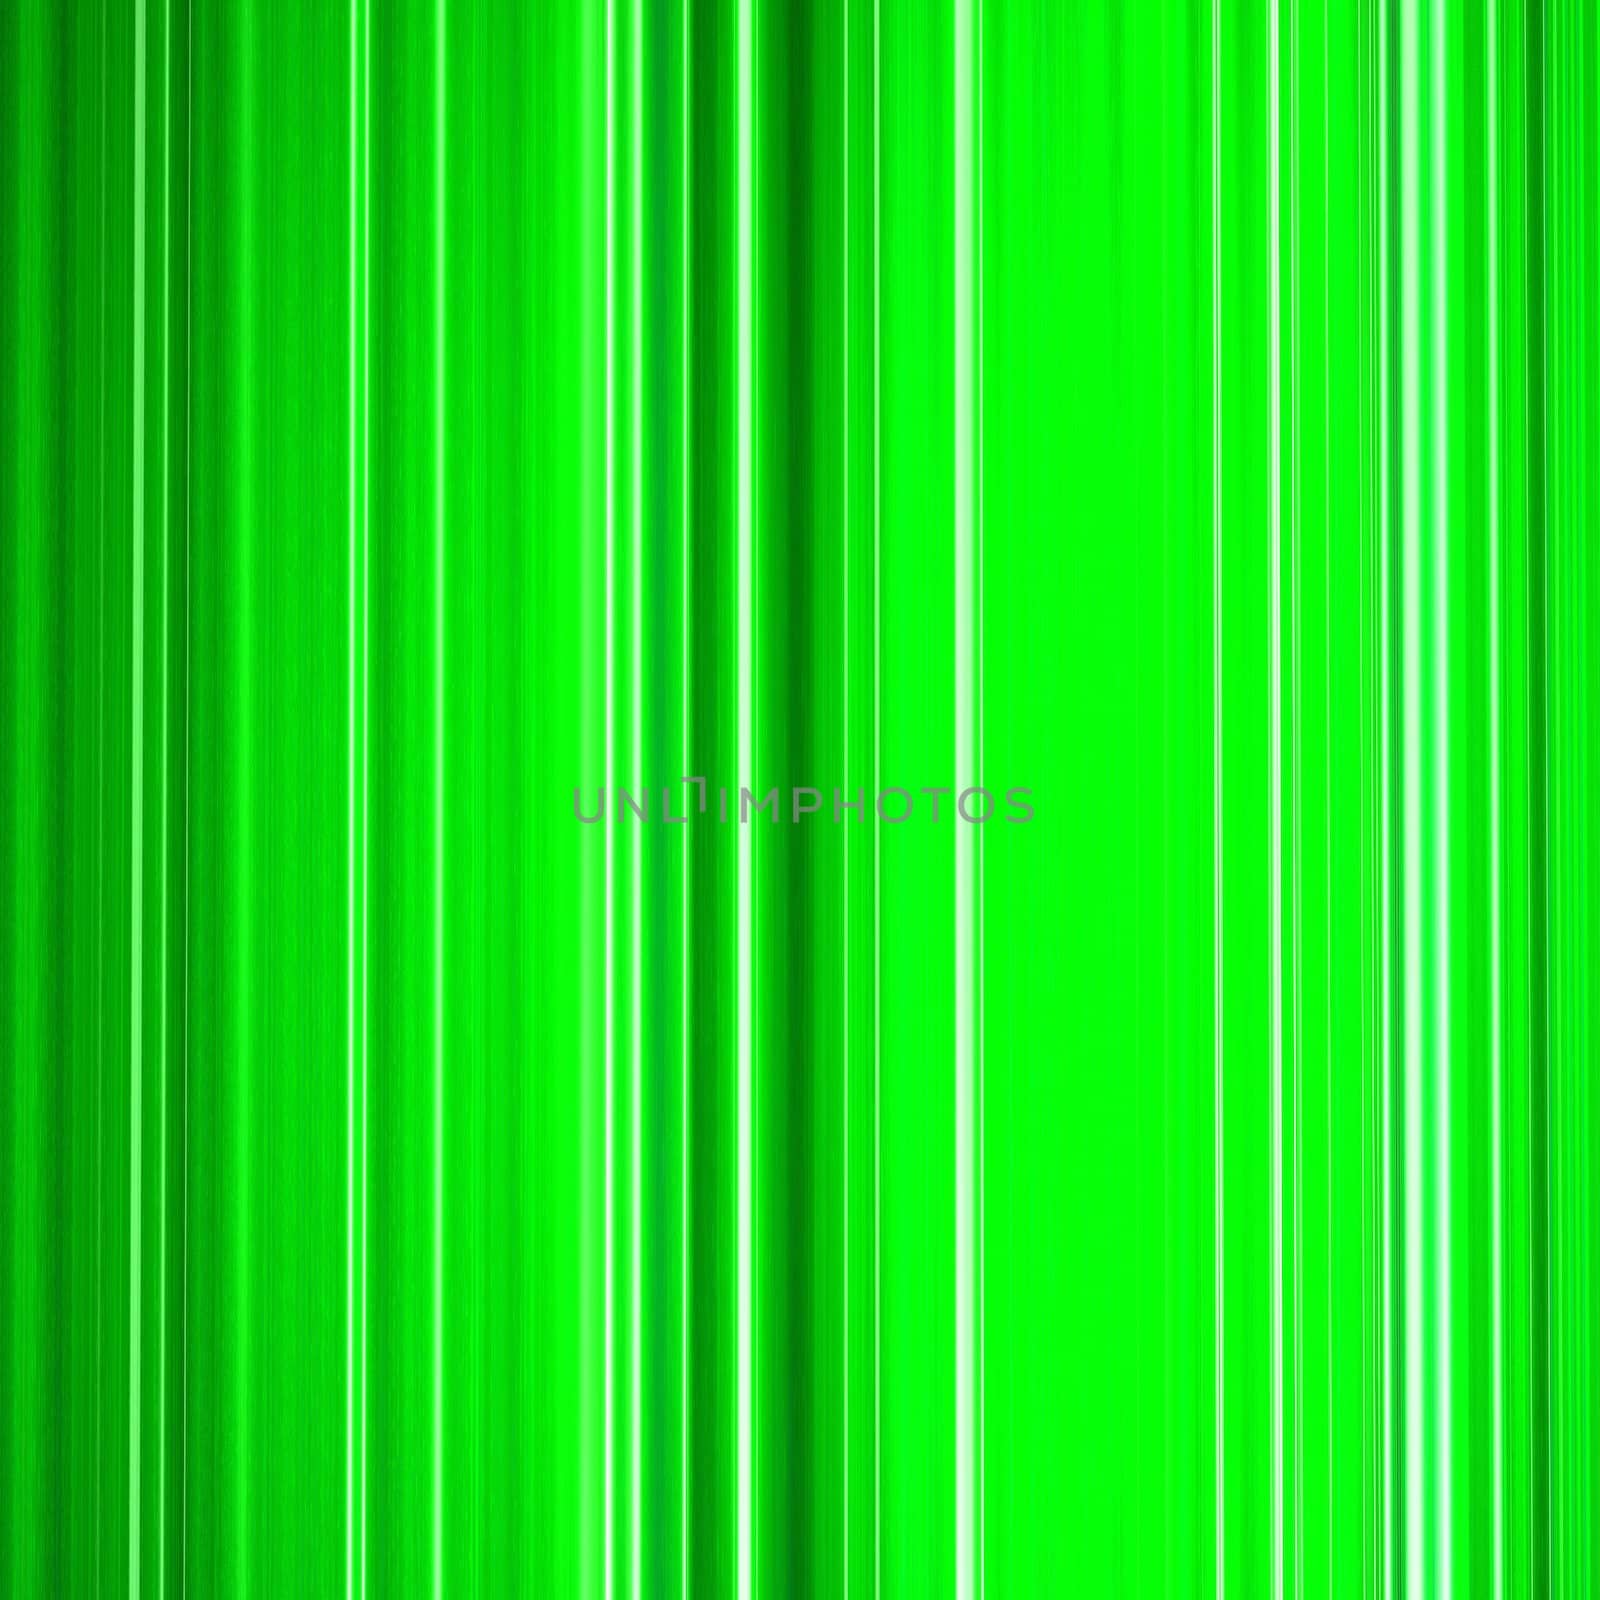 A background illustration of green vertical lines.